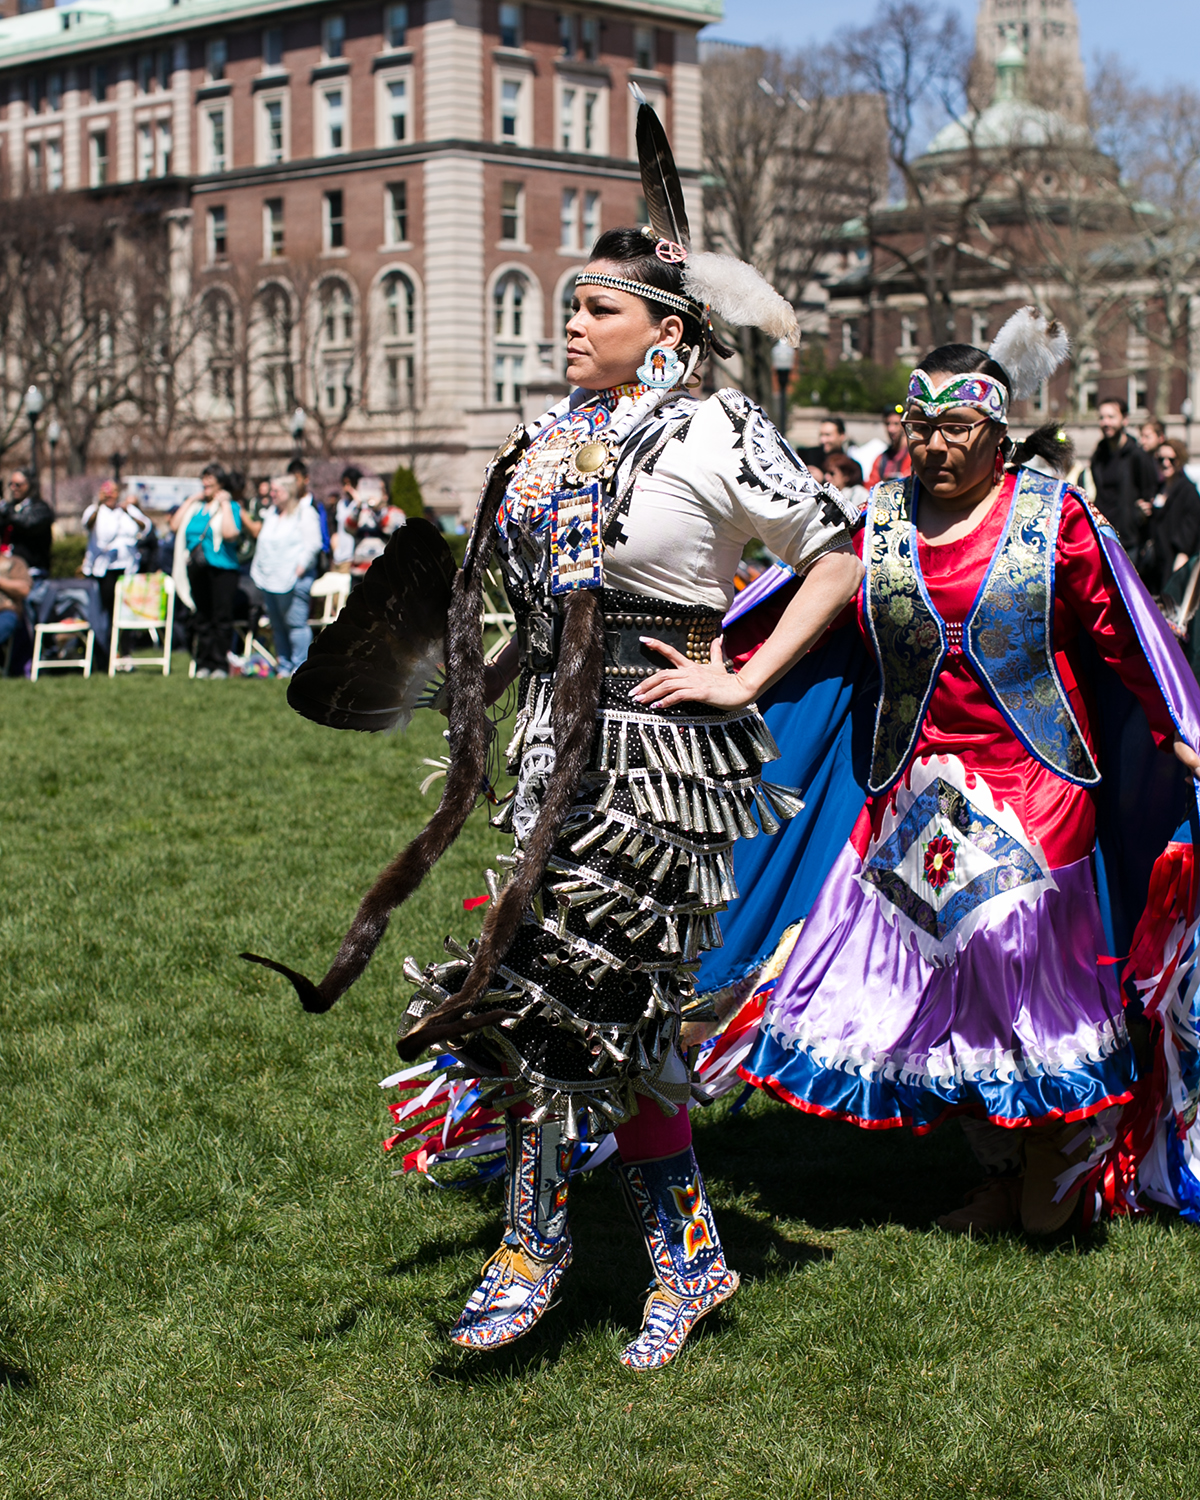 “Jingle Dress” or “Medicine” Dancer Columbia University-Morningside Campus: South Lawn East: 2970 Broadway, New York City, NY